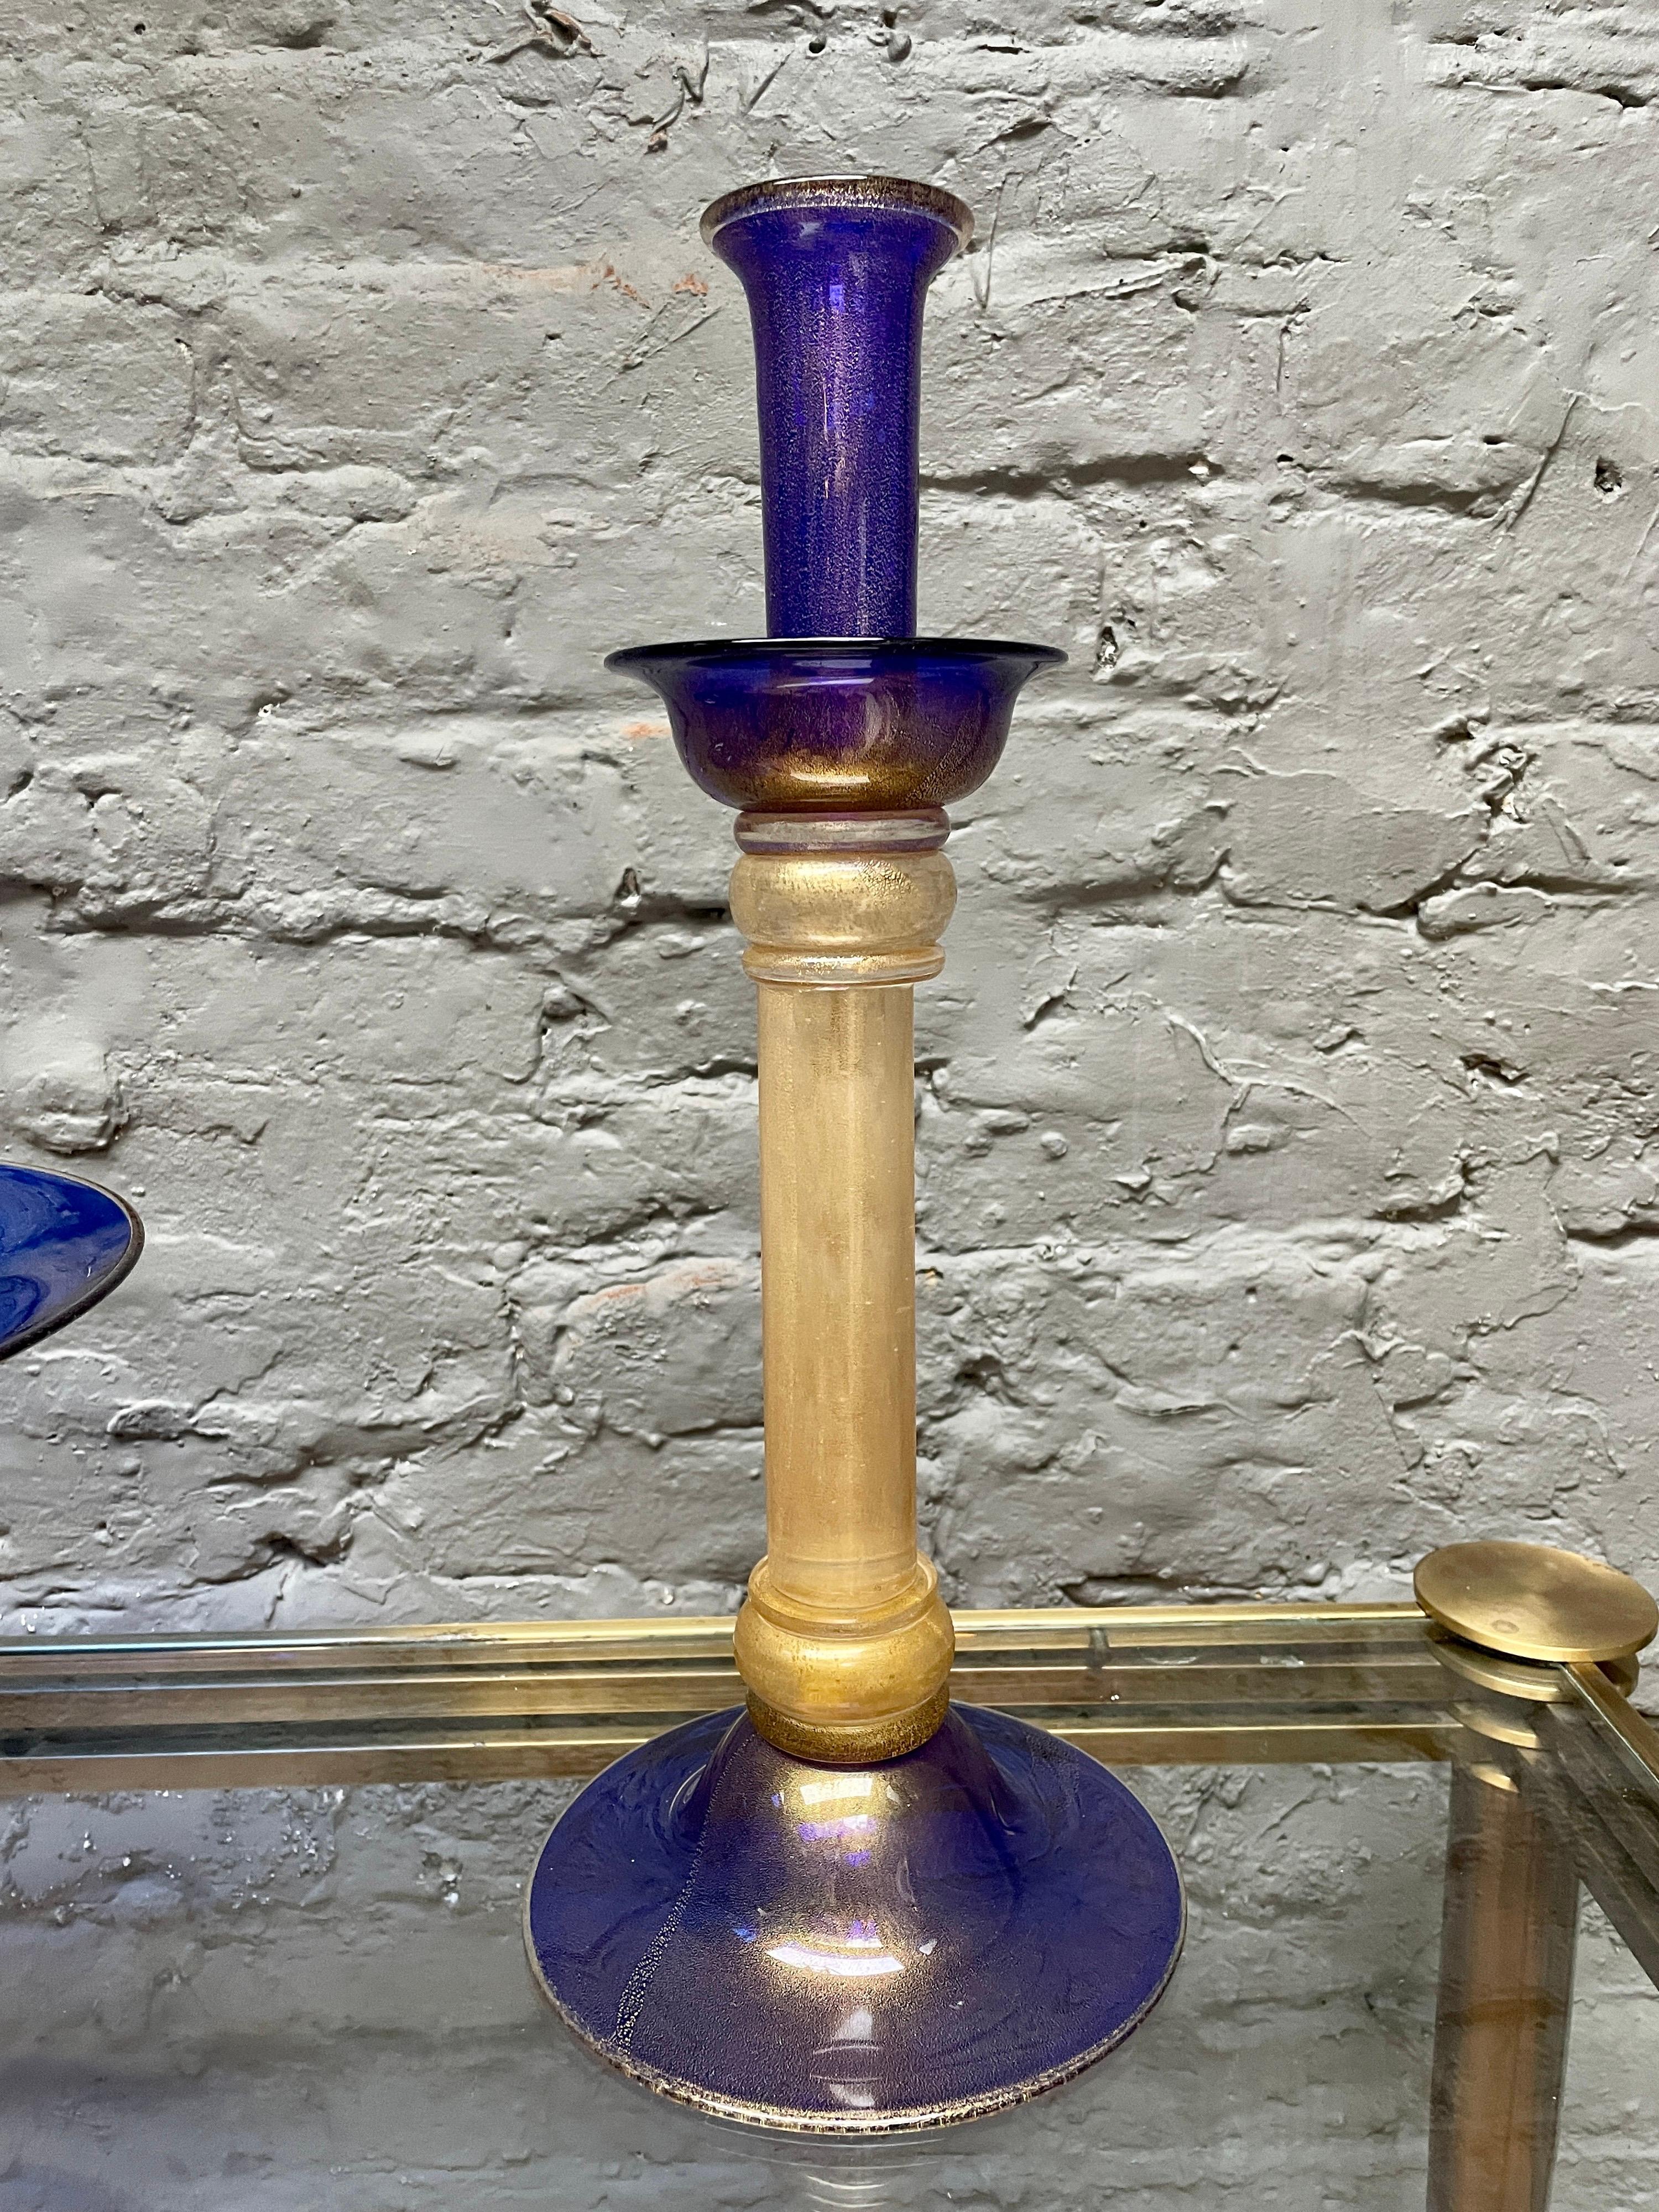 A set of candlesticks and Tazza, in cobalt blue and flecked gold Murano glass, signed and dated by the artist.

Measures: The Tazza is 32cm W x 22cm H.